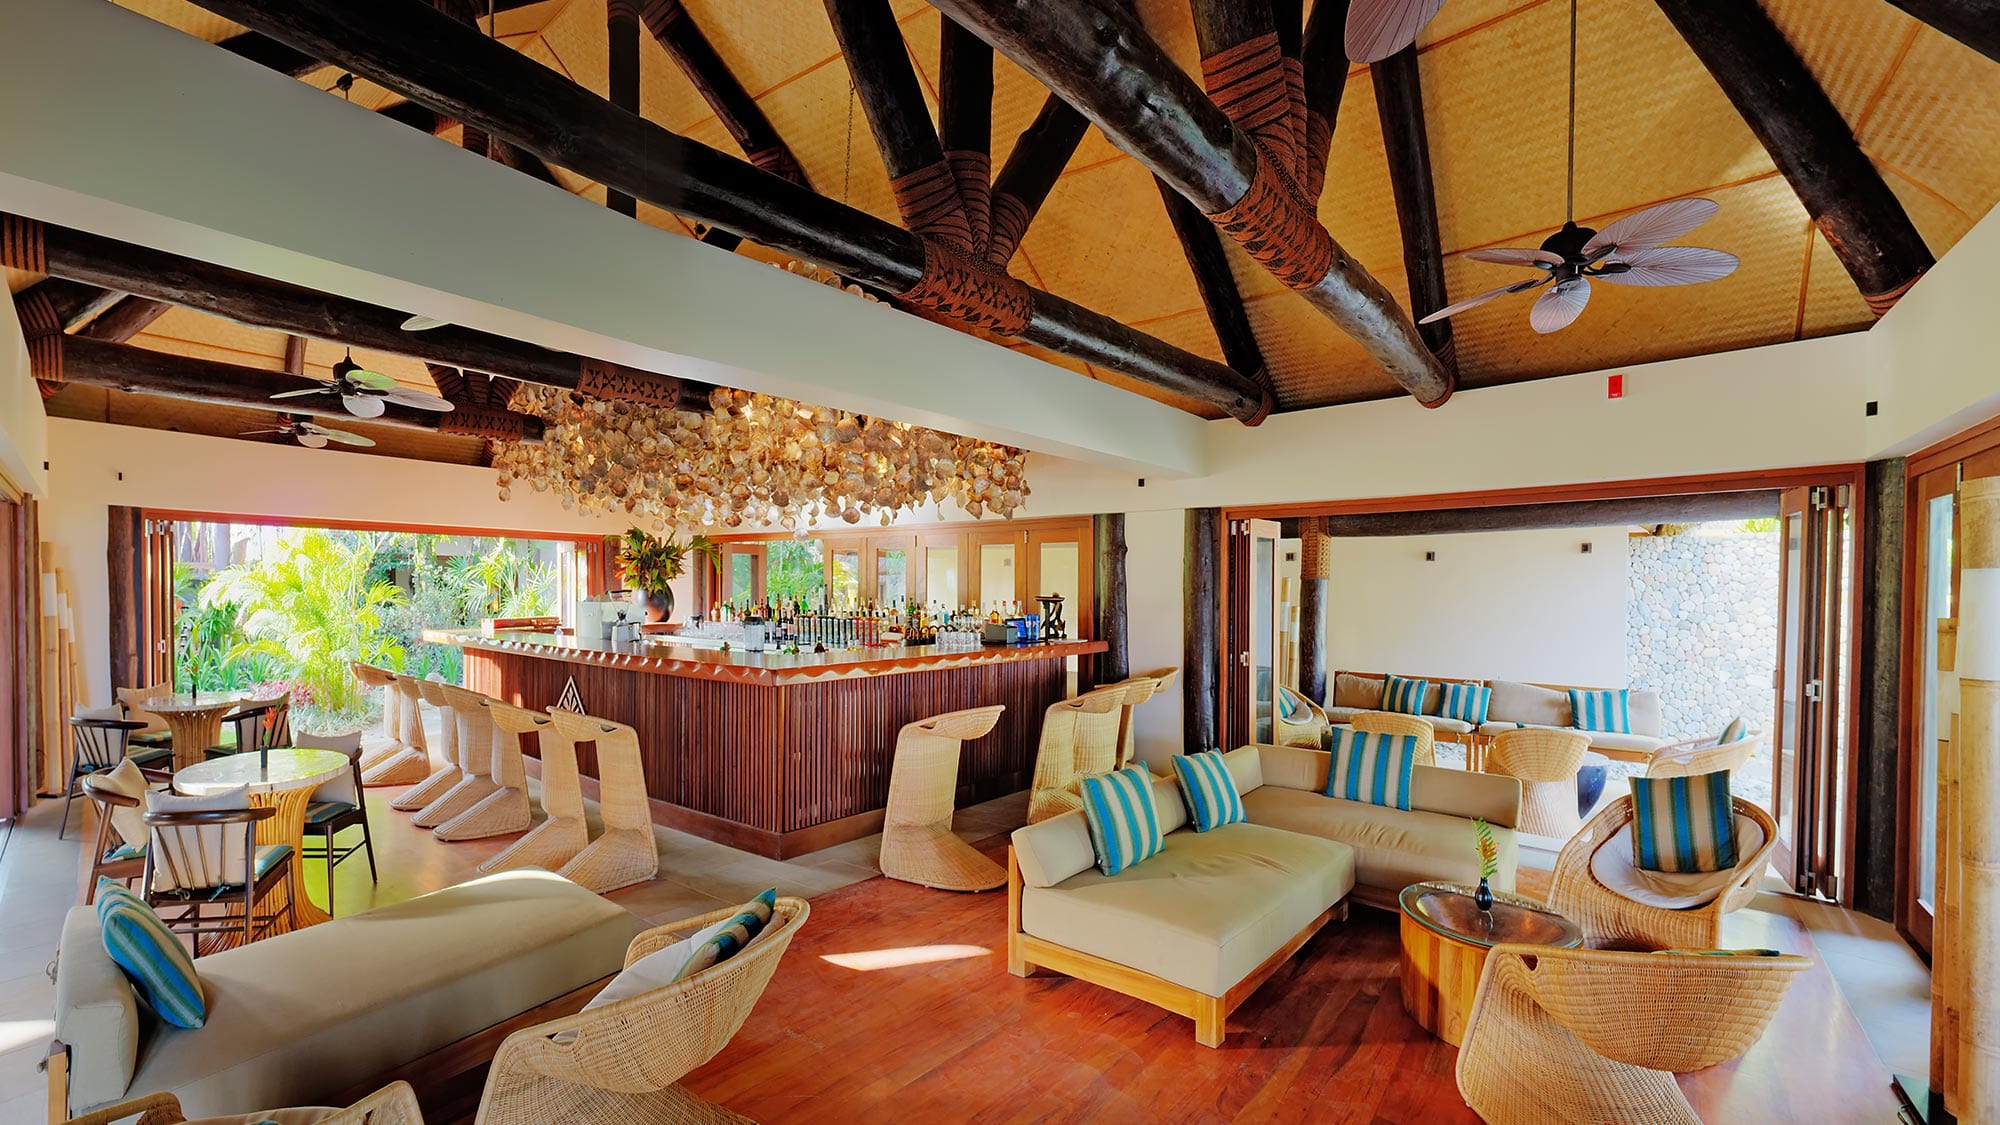 Lounge with colorful bar and ceiling fans